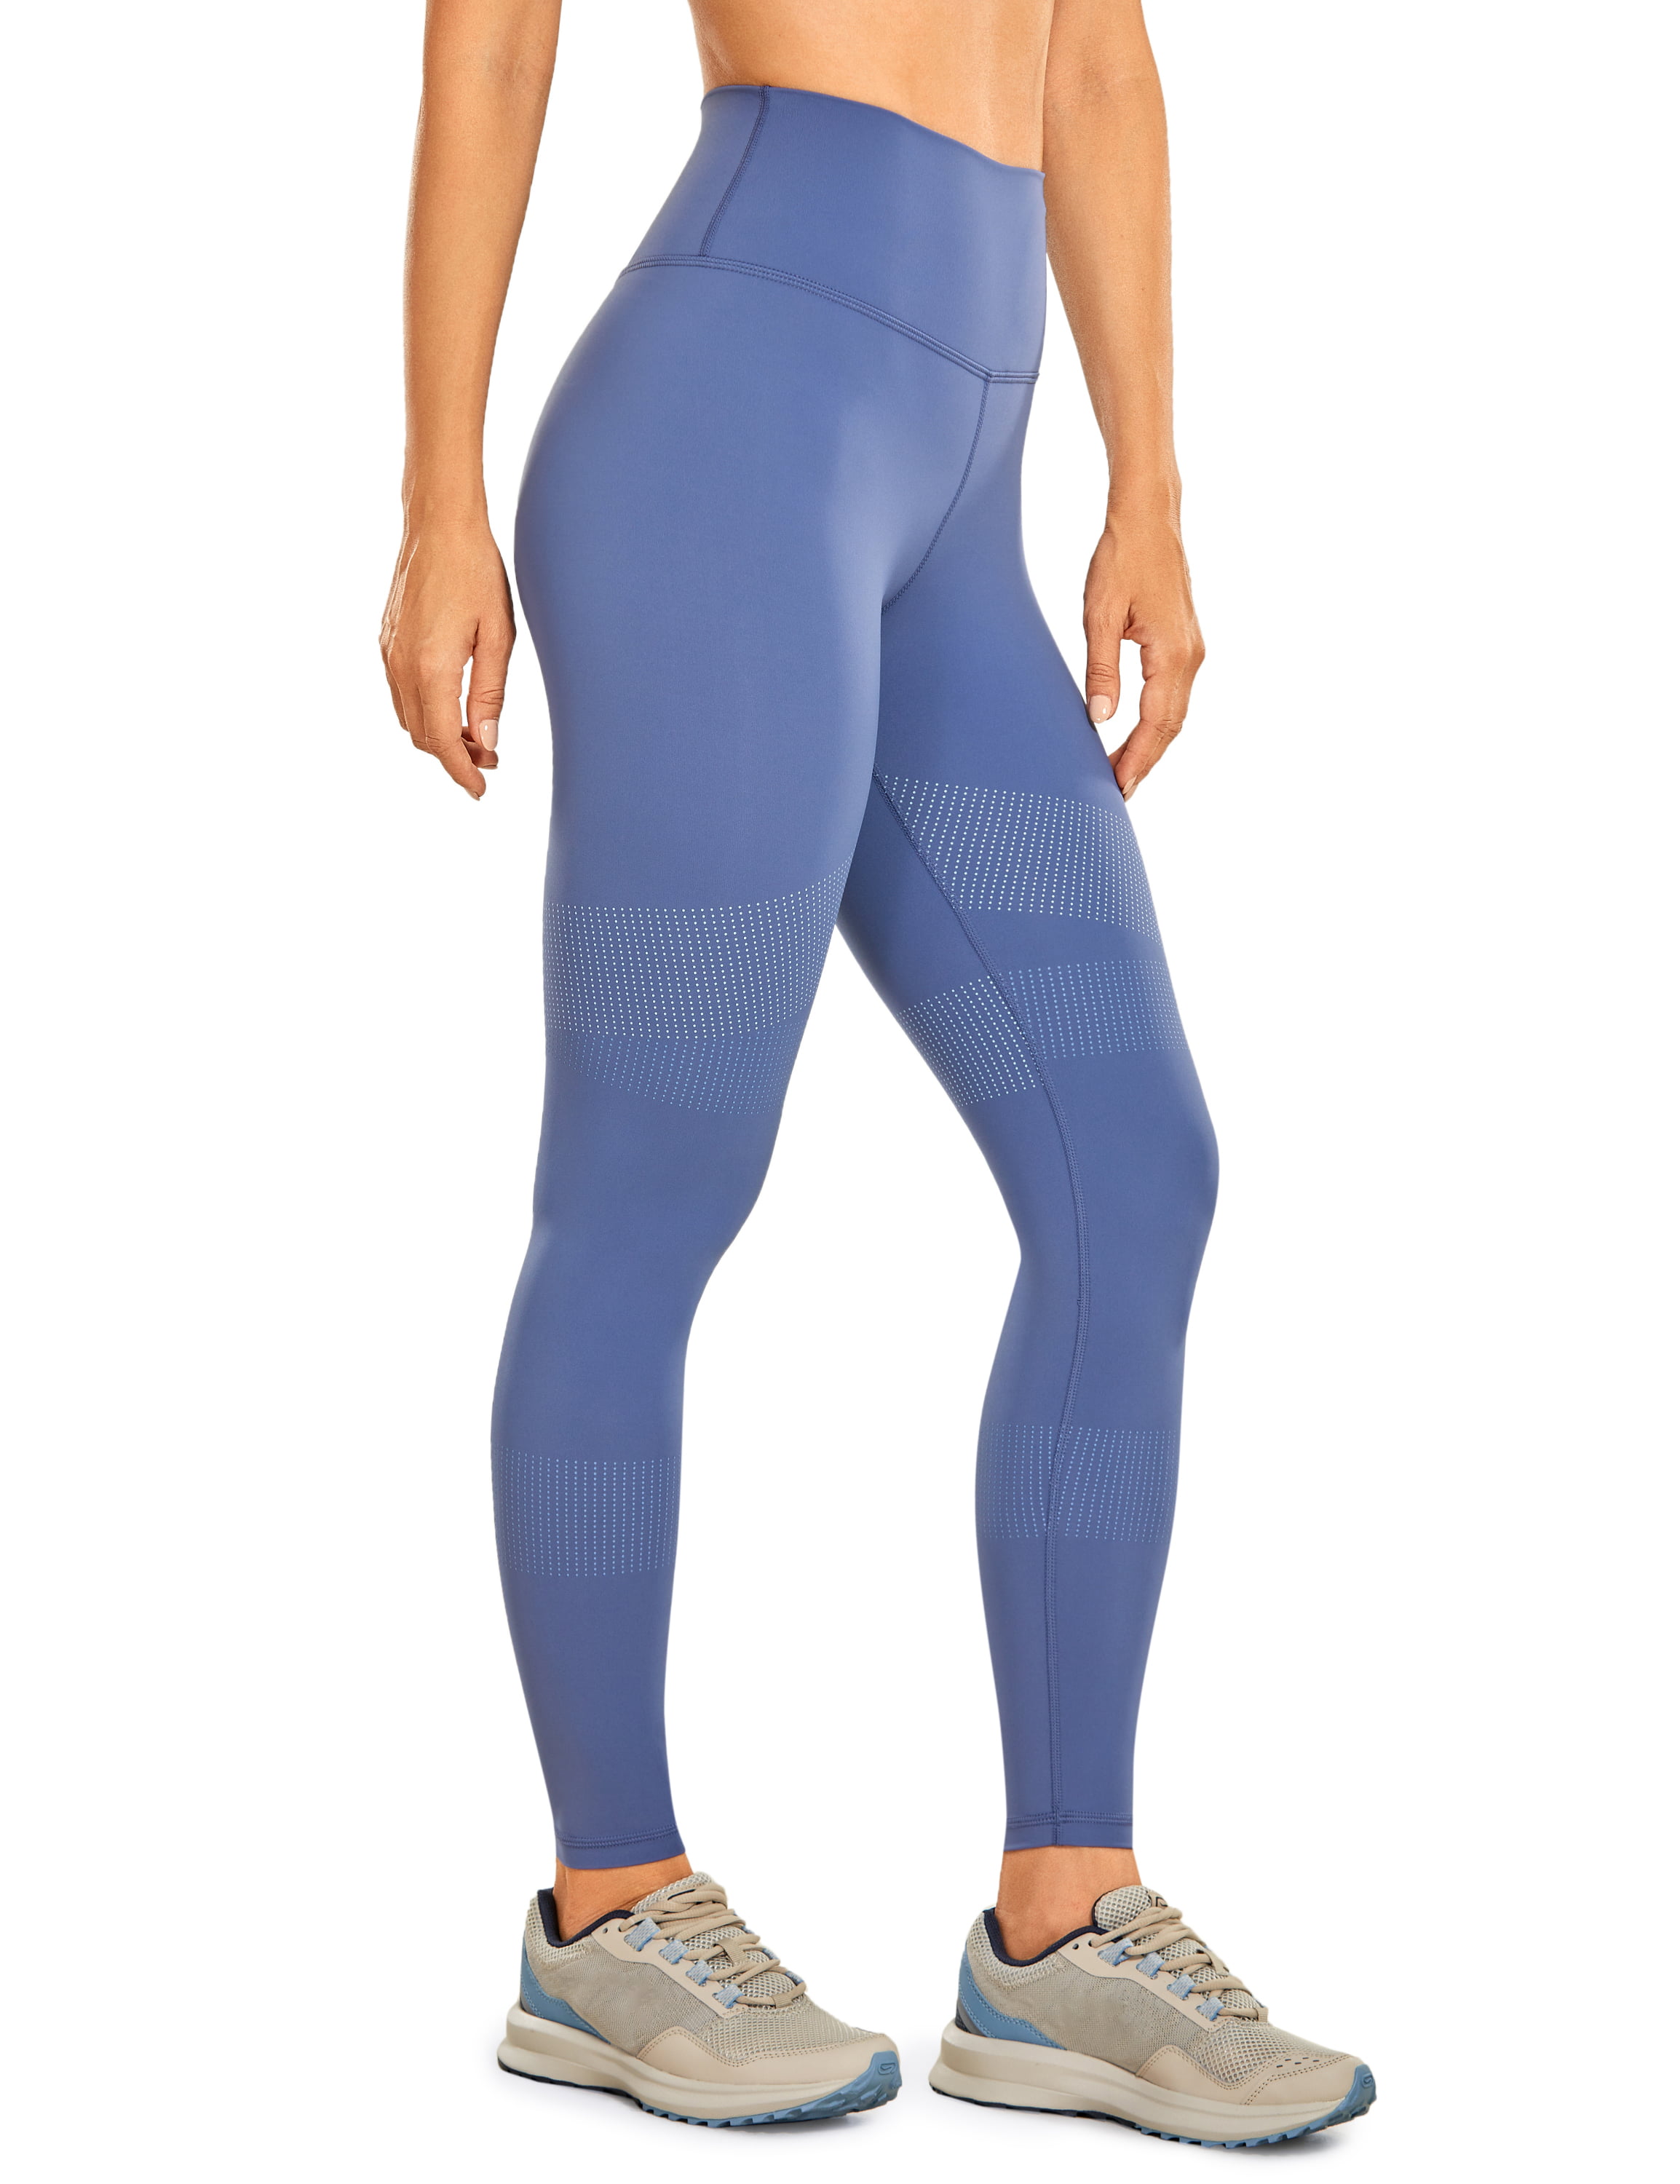 CRZ YGOA Women's Naked Feeling Workout Leggings 25 Inches - High Waisted  Athletic Yoga Pants Buttery Soft - Walmart.com